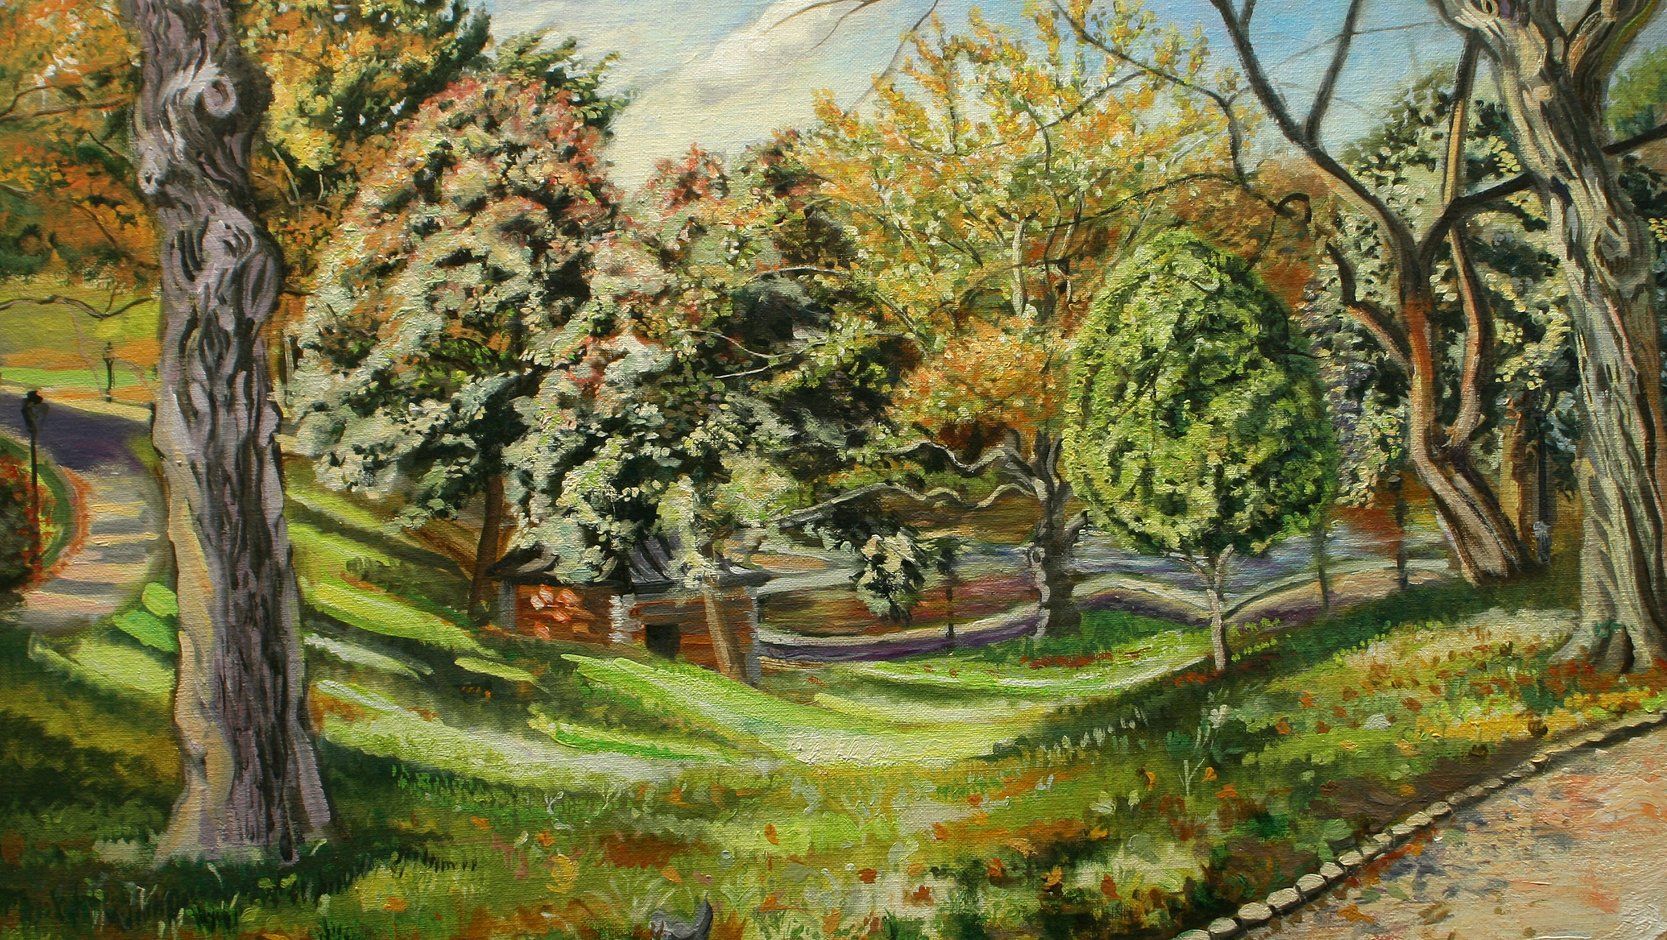 J. Varriano, American Artist Landscape Oil Painting:  Dreamscape